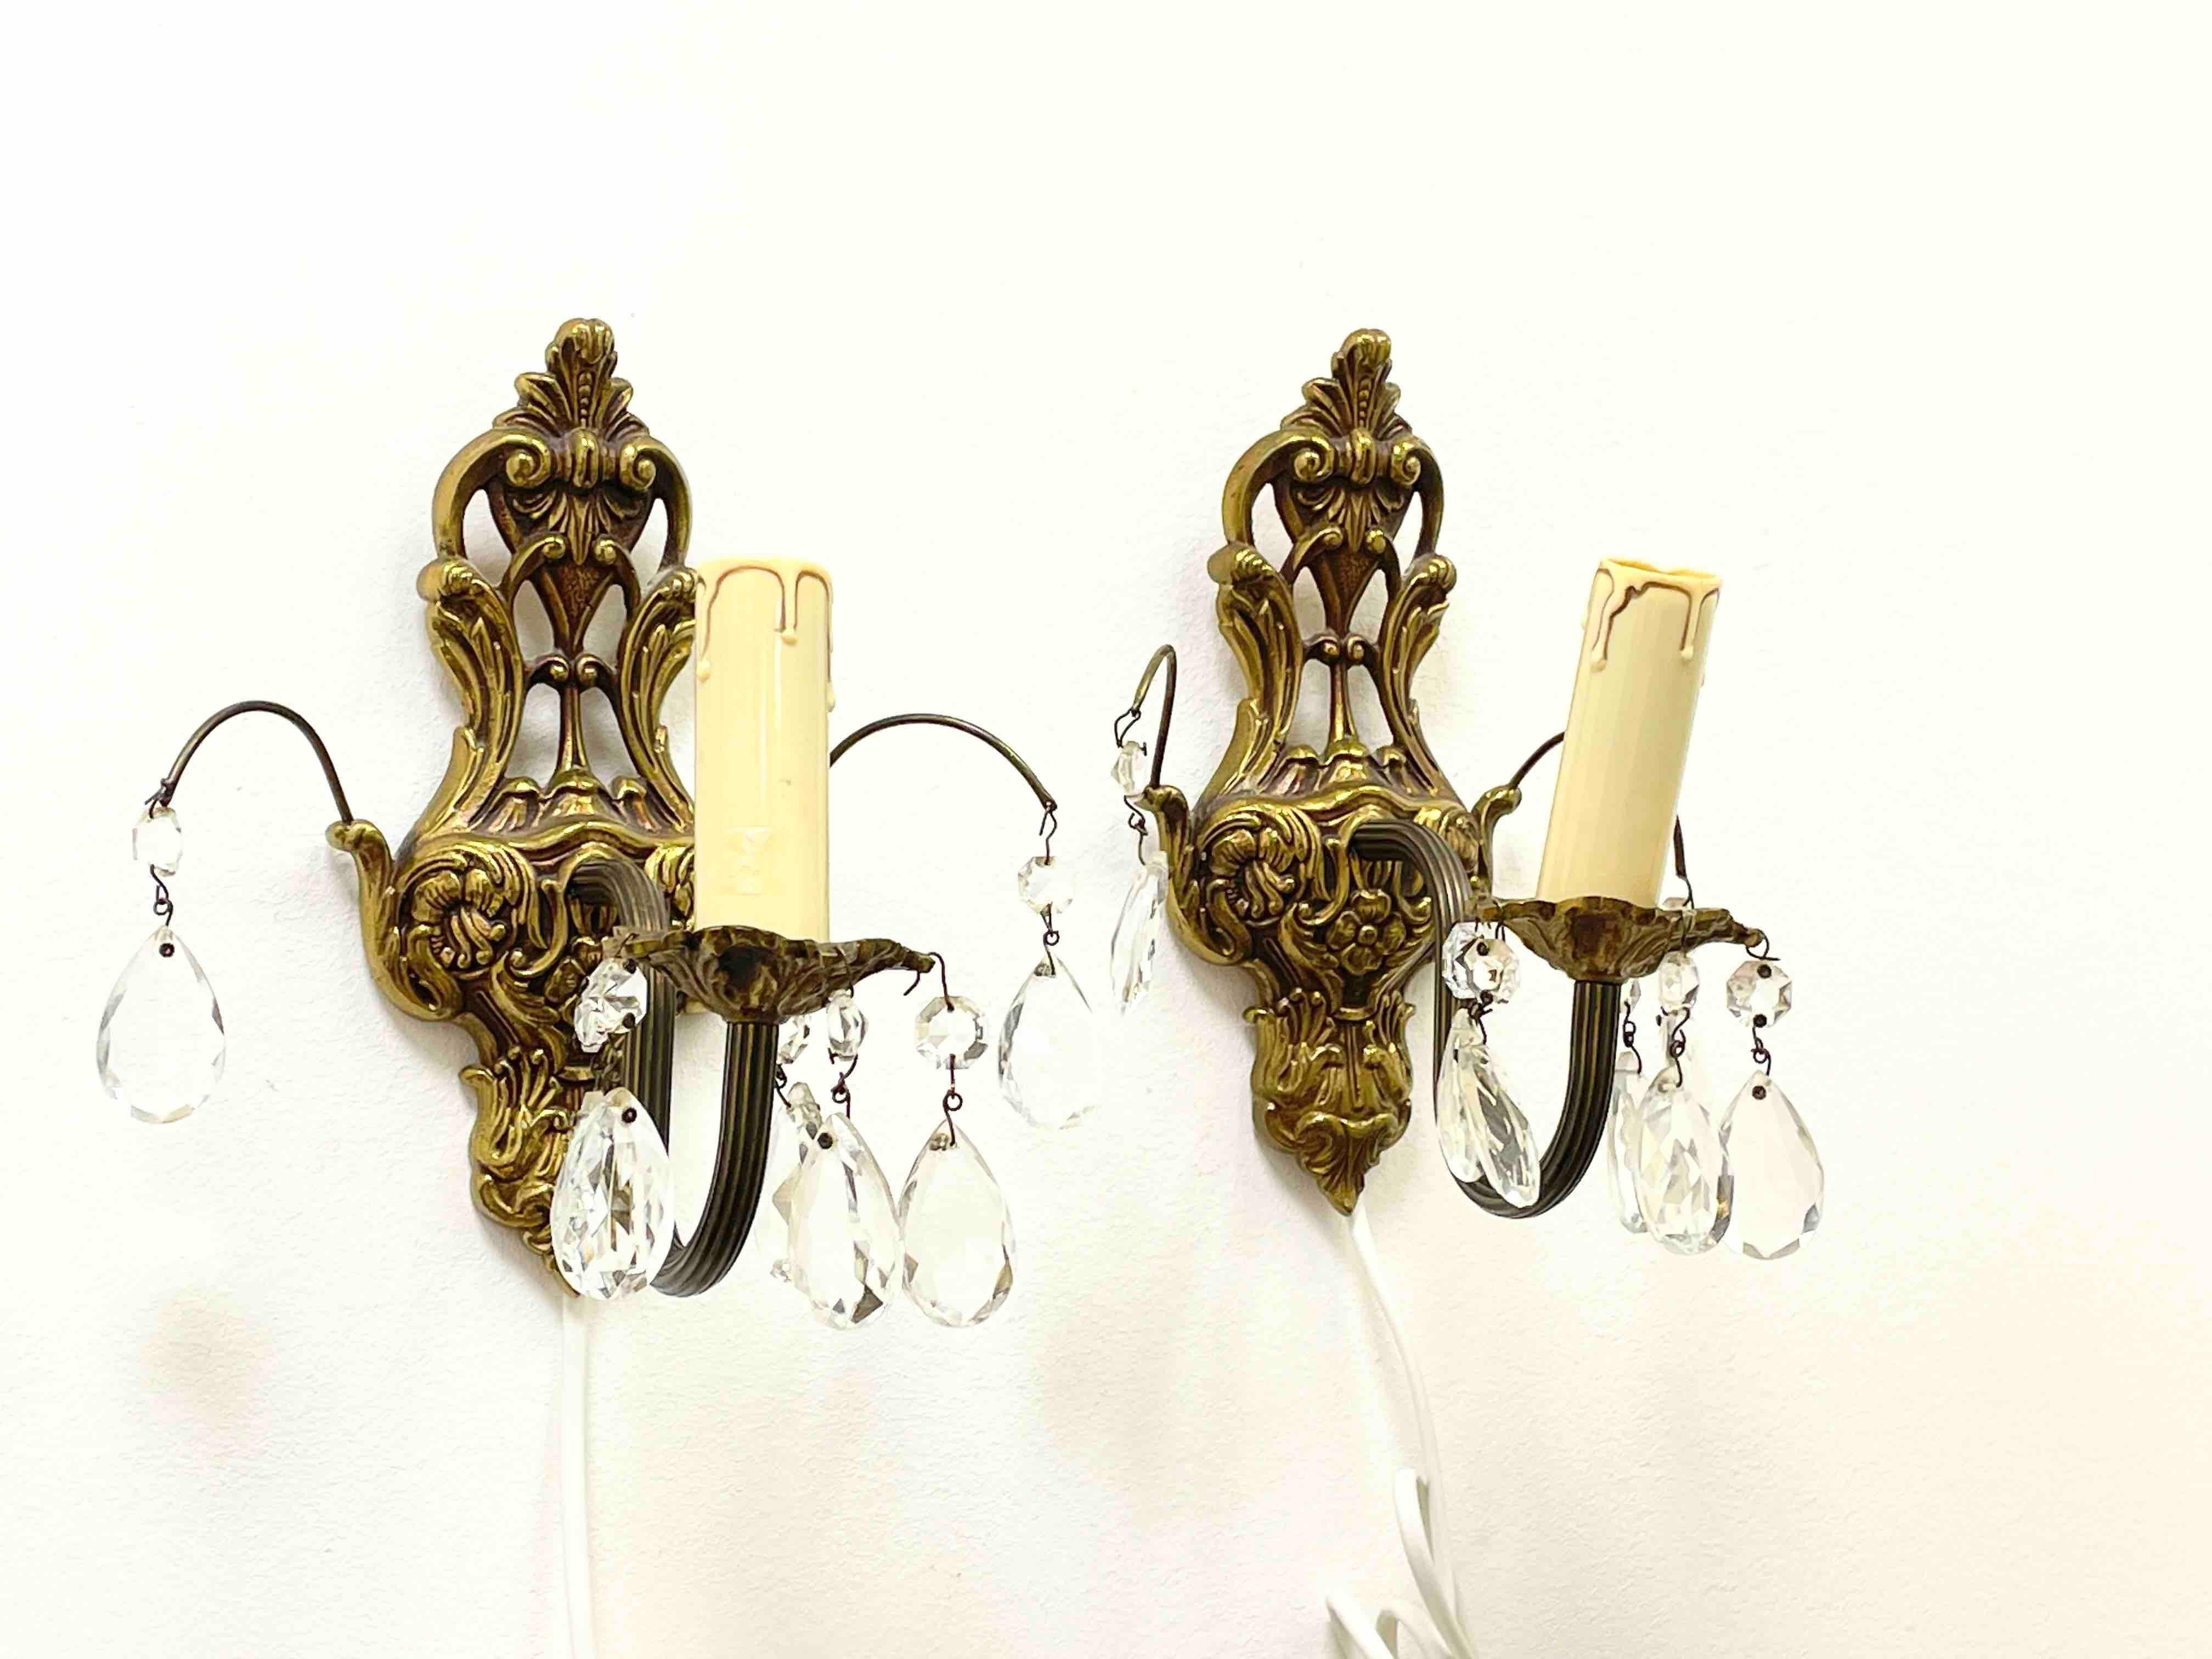 Swedish Pair of Sconces Bronze and Crystal Glass, Sweden, 1950s For Sale